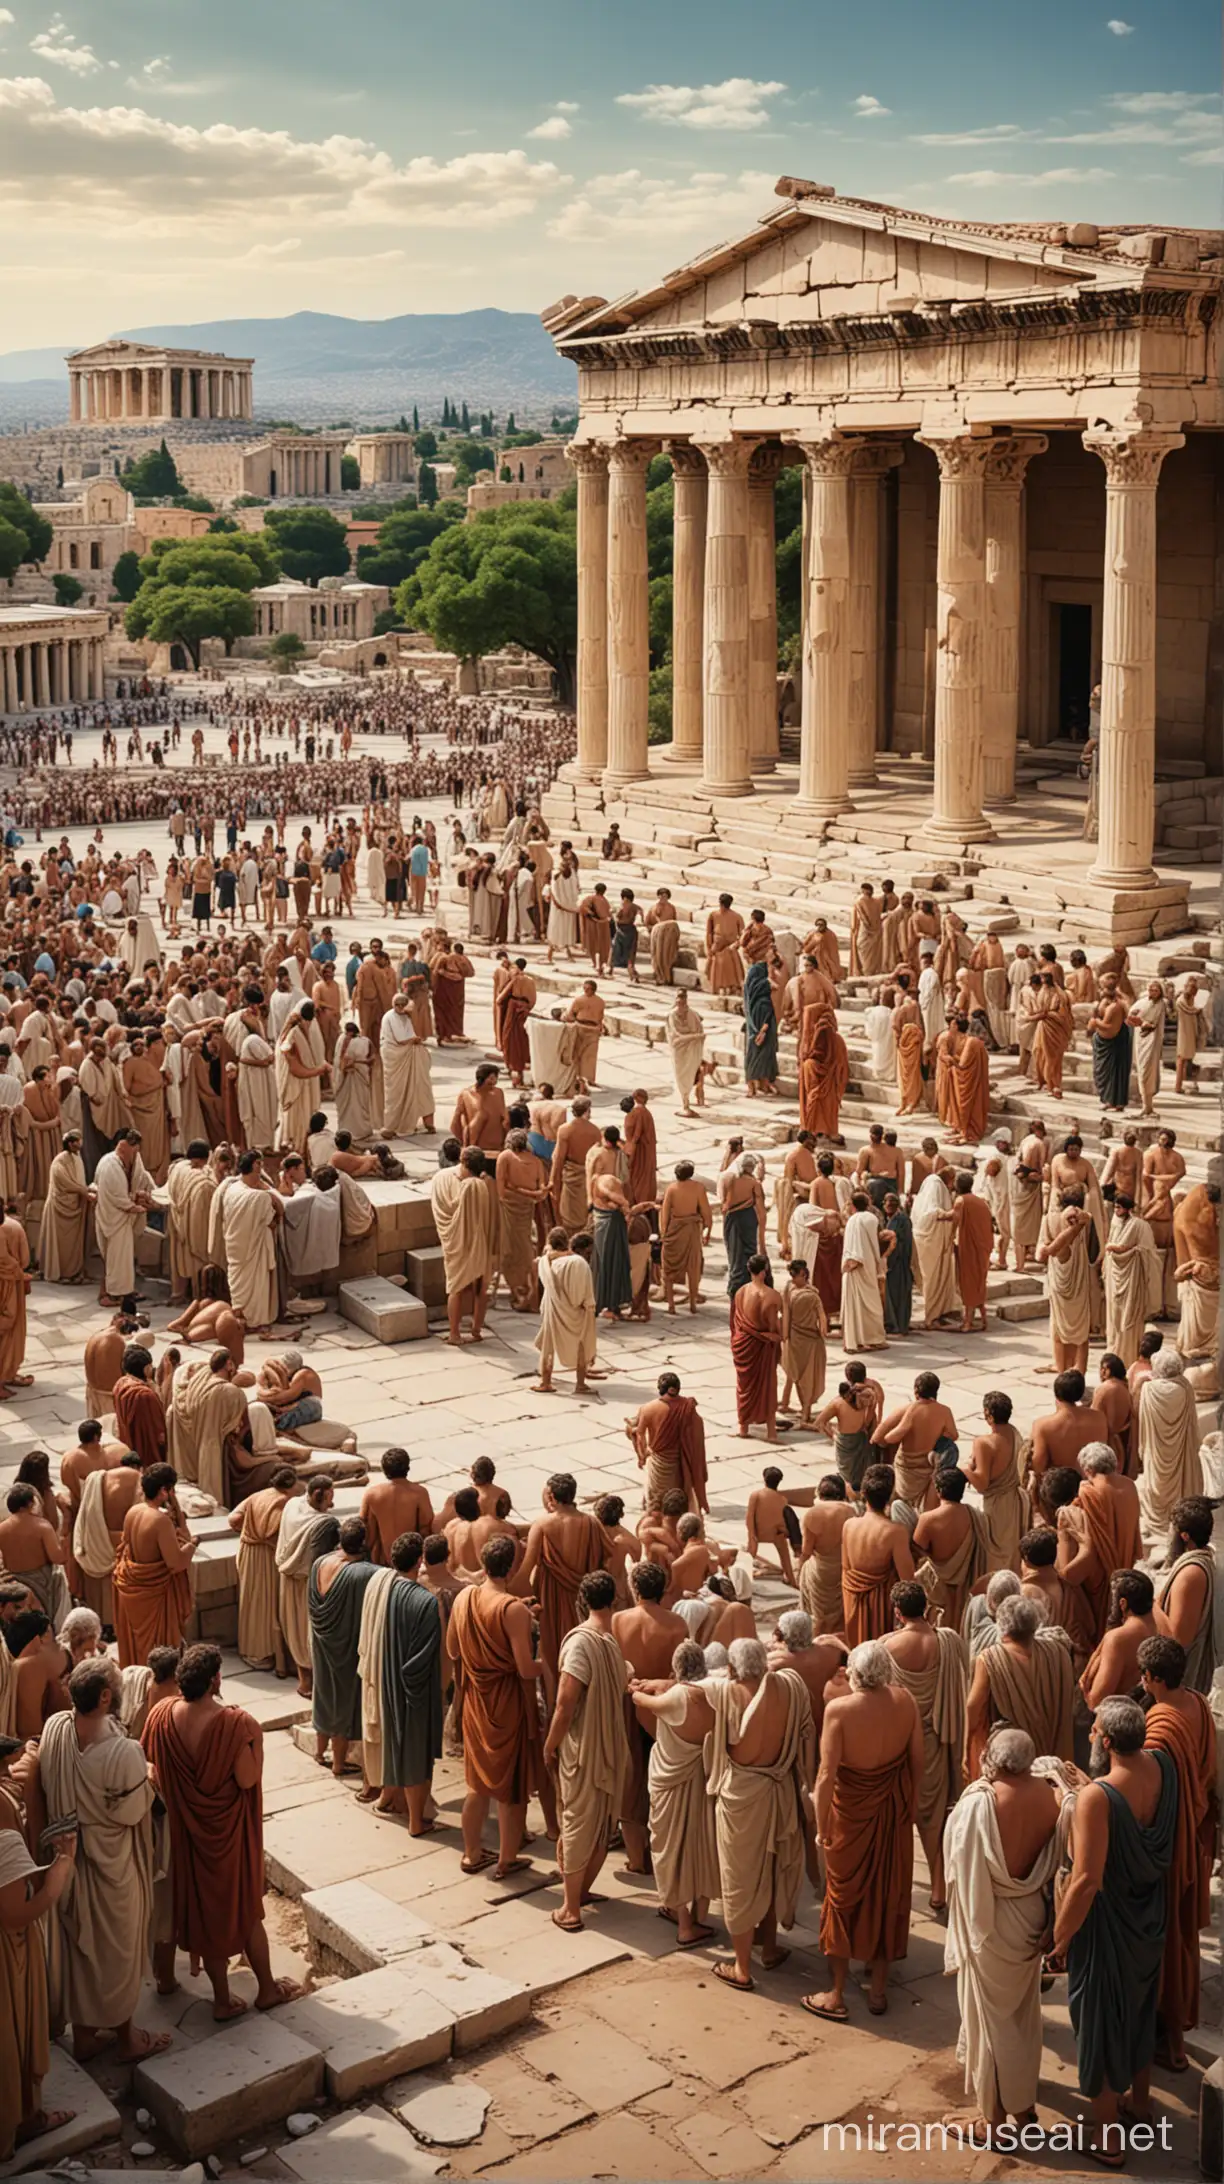 A bustling scene in the middle of a crowded Agora, with Socrates surrounded by people. As Socrates speaks passionately, the people around him listen thoughtfully. In the background, the ancient architecture of Athens and the bustling atmosphere of the Agora enhance the ambiance.